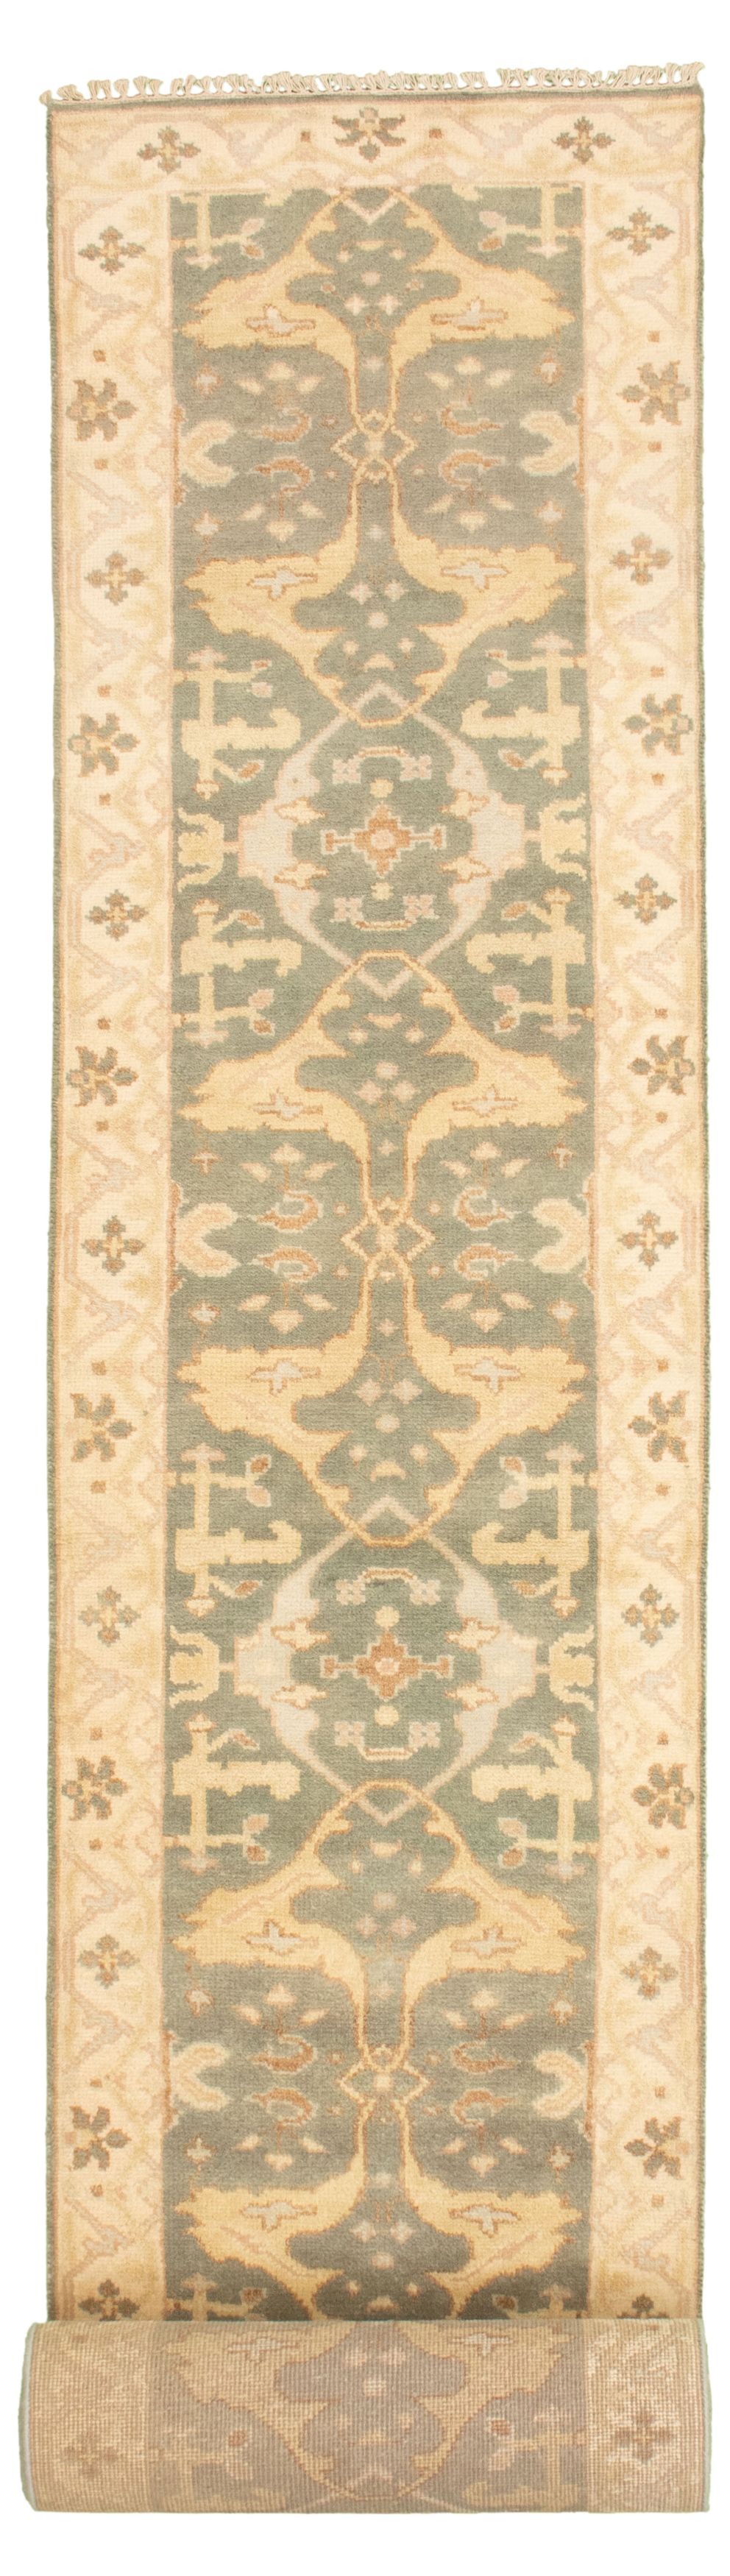 Hand-knotted Royal Ushak Teal Wool Rug 2'7" x 20'9" Size: 2'7" x 20'9"  